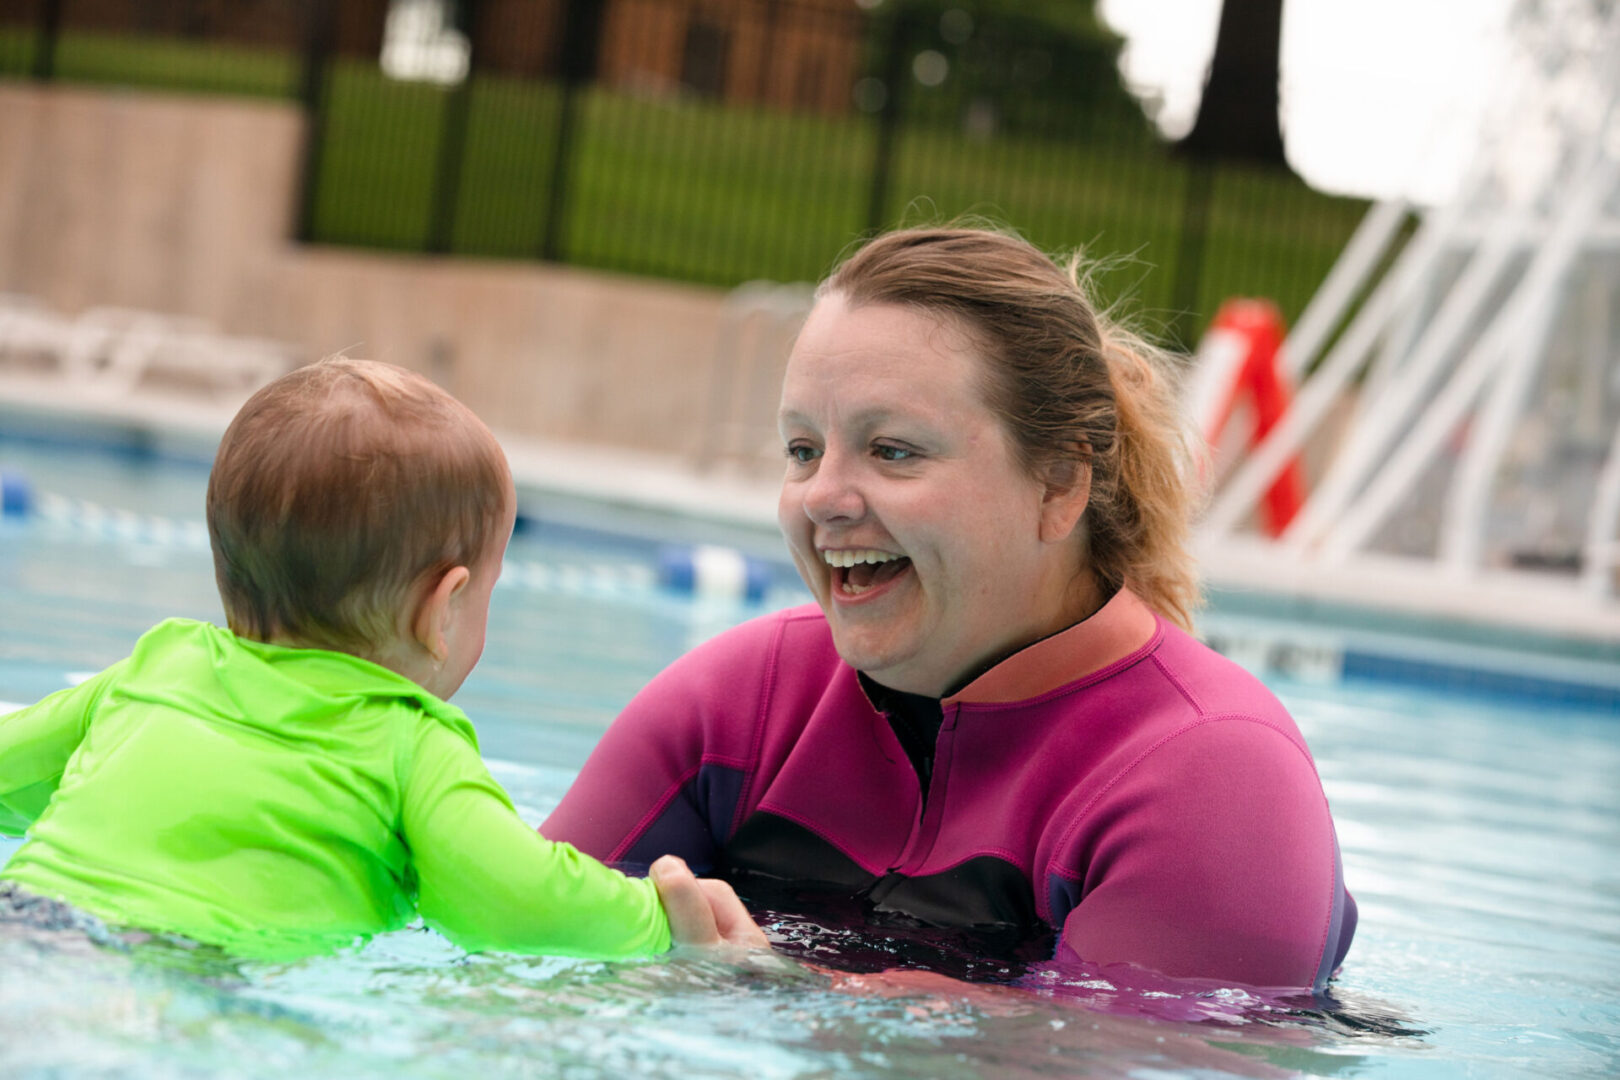 A woman and child in the water at a pool.